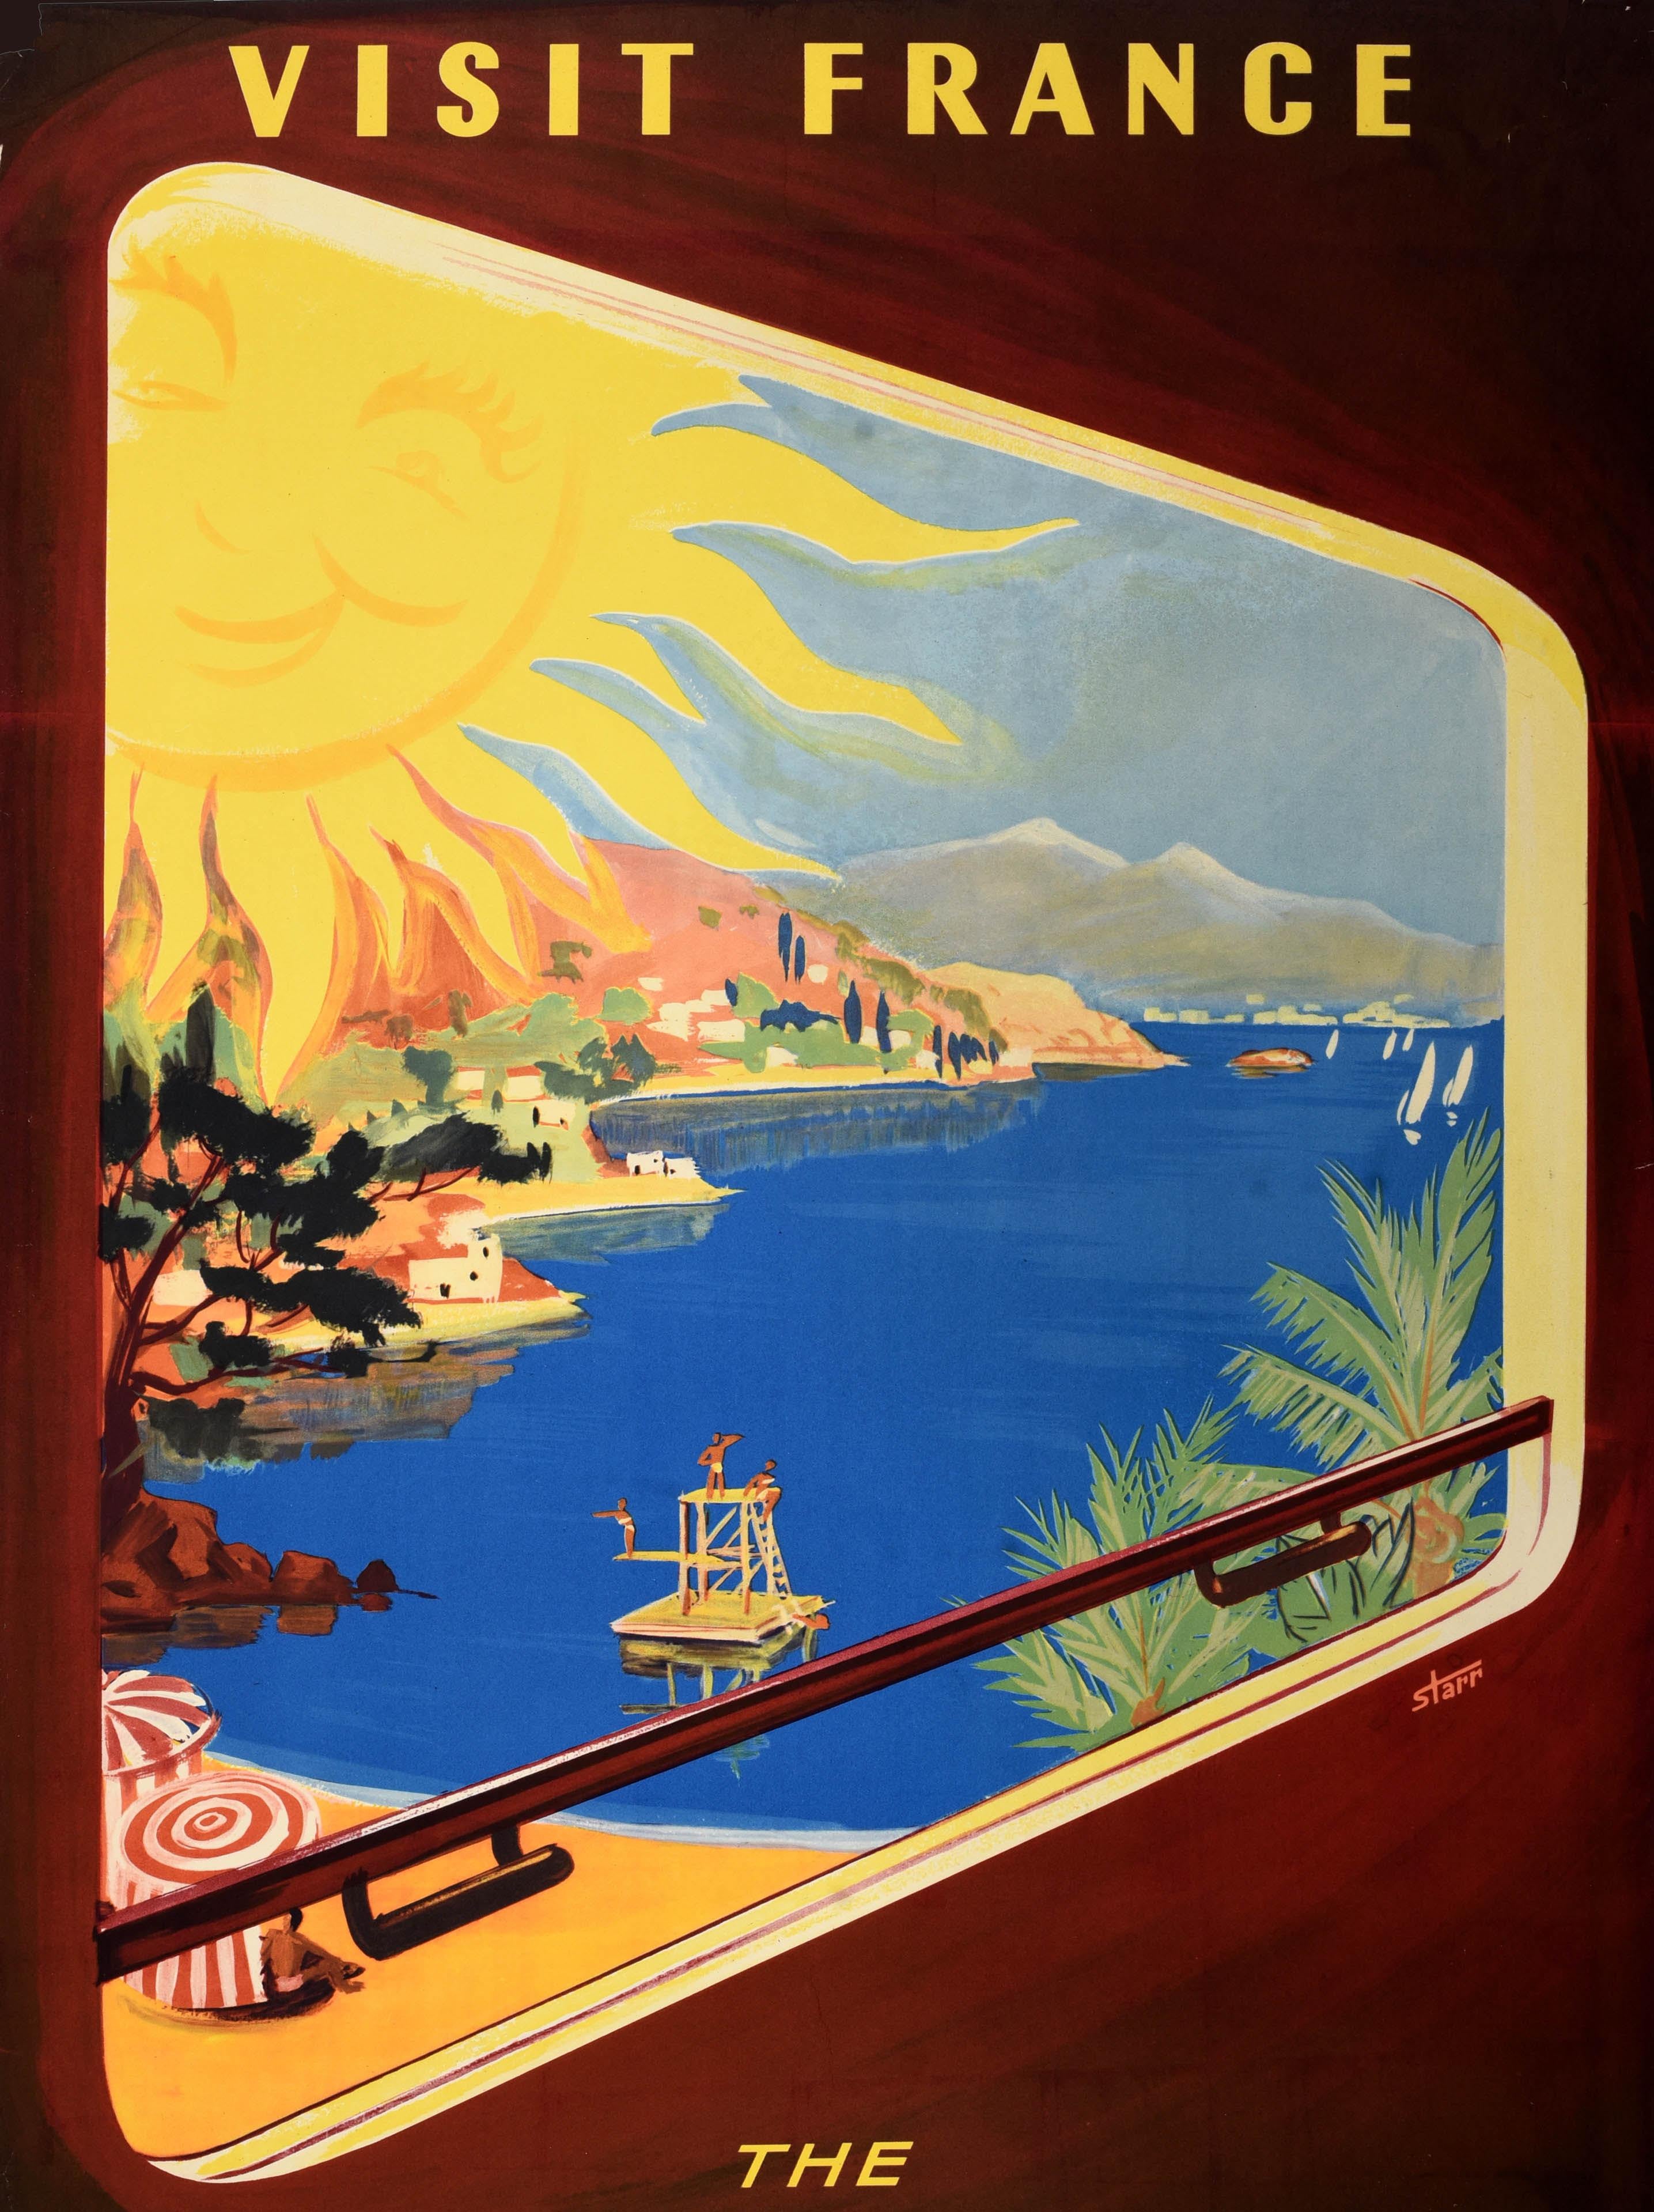 Original vintage SNCF railway travel poster for the Cote d'Azur - Visit France The French Riviera use the trains and motor coaches of the French National Railroads - featuring colourful artwork depicting a sandy beach with palm trees, people